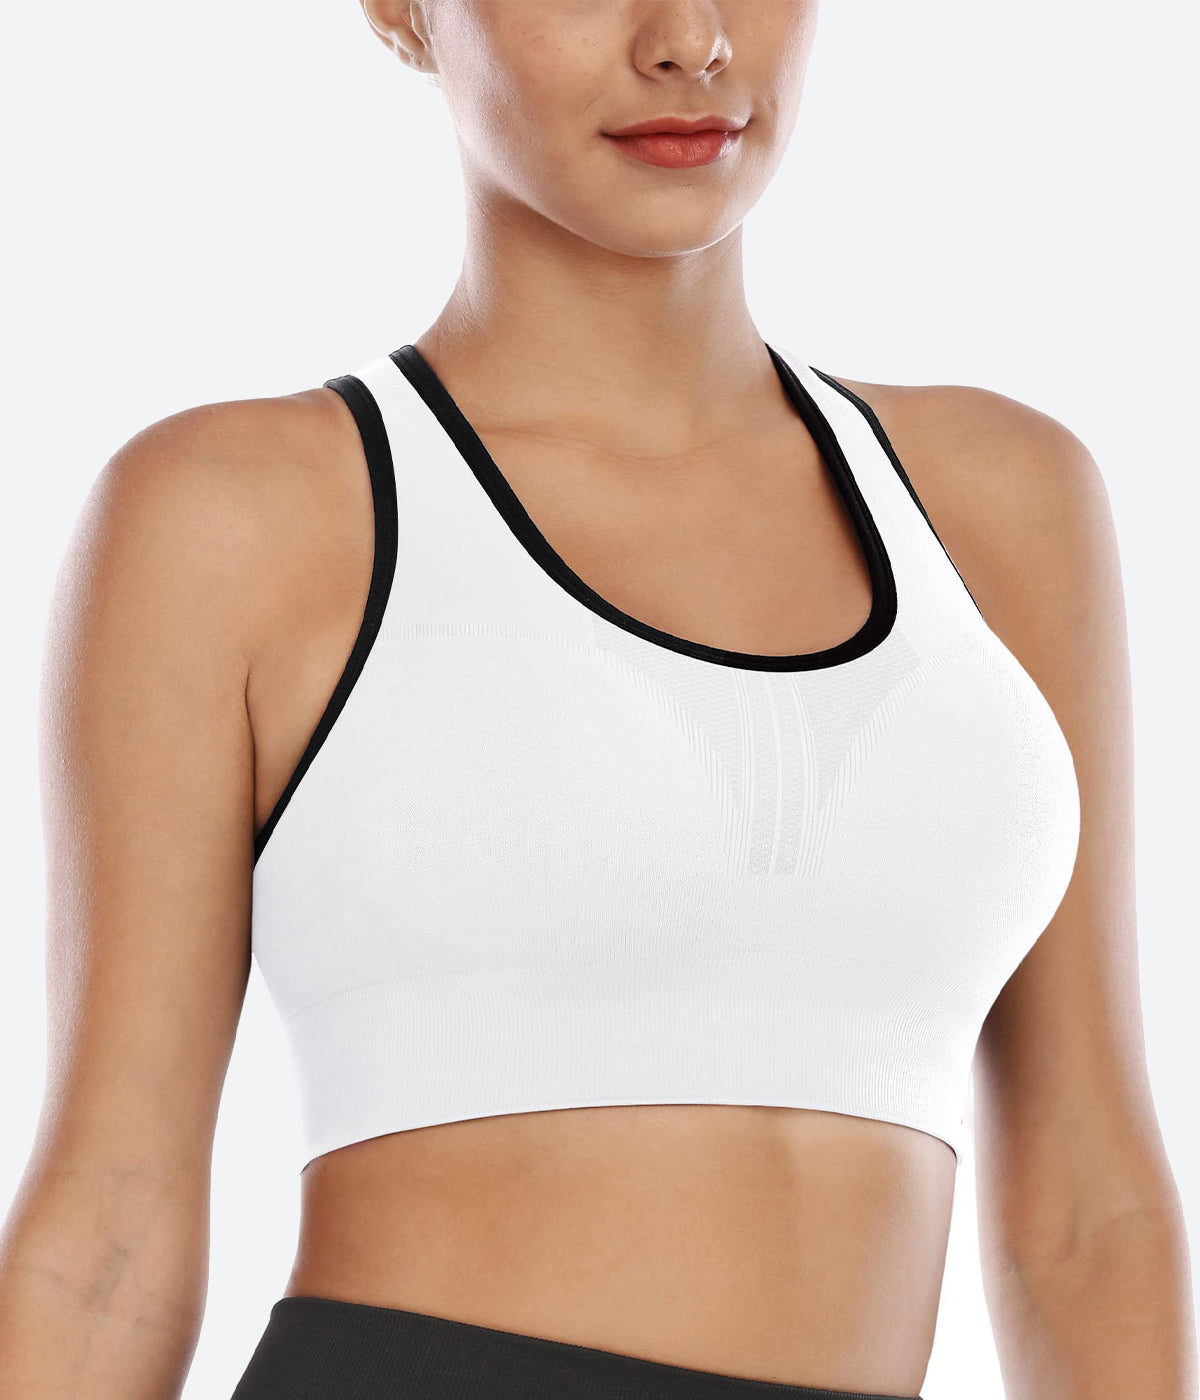 Ultimate companion for every impact level of exercise - Riza Sport Bra 